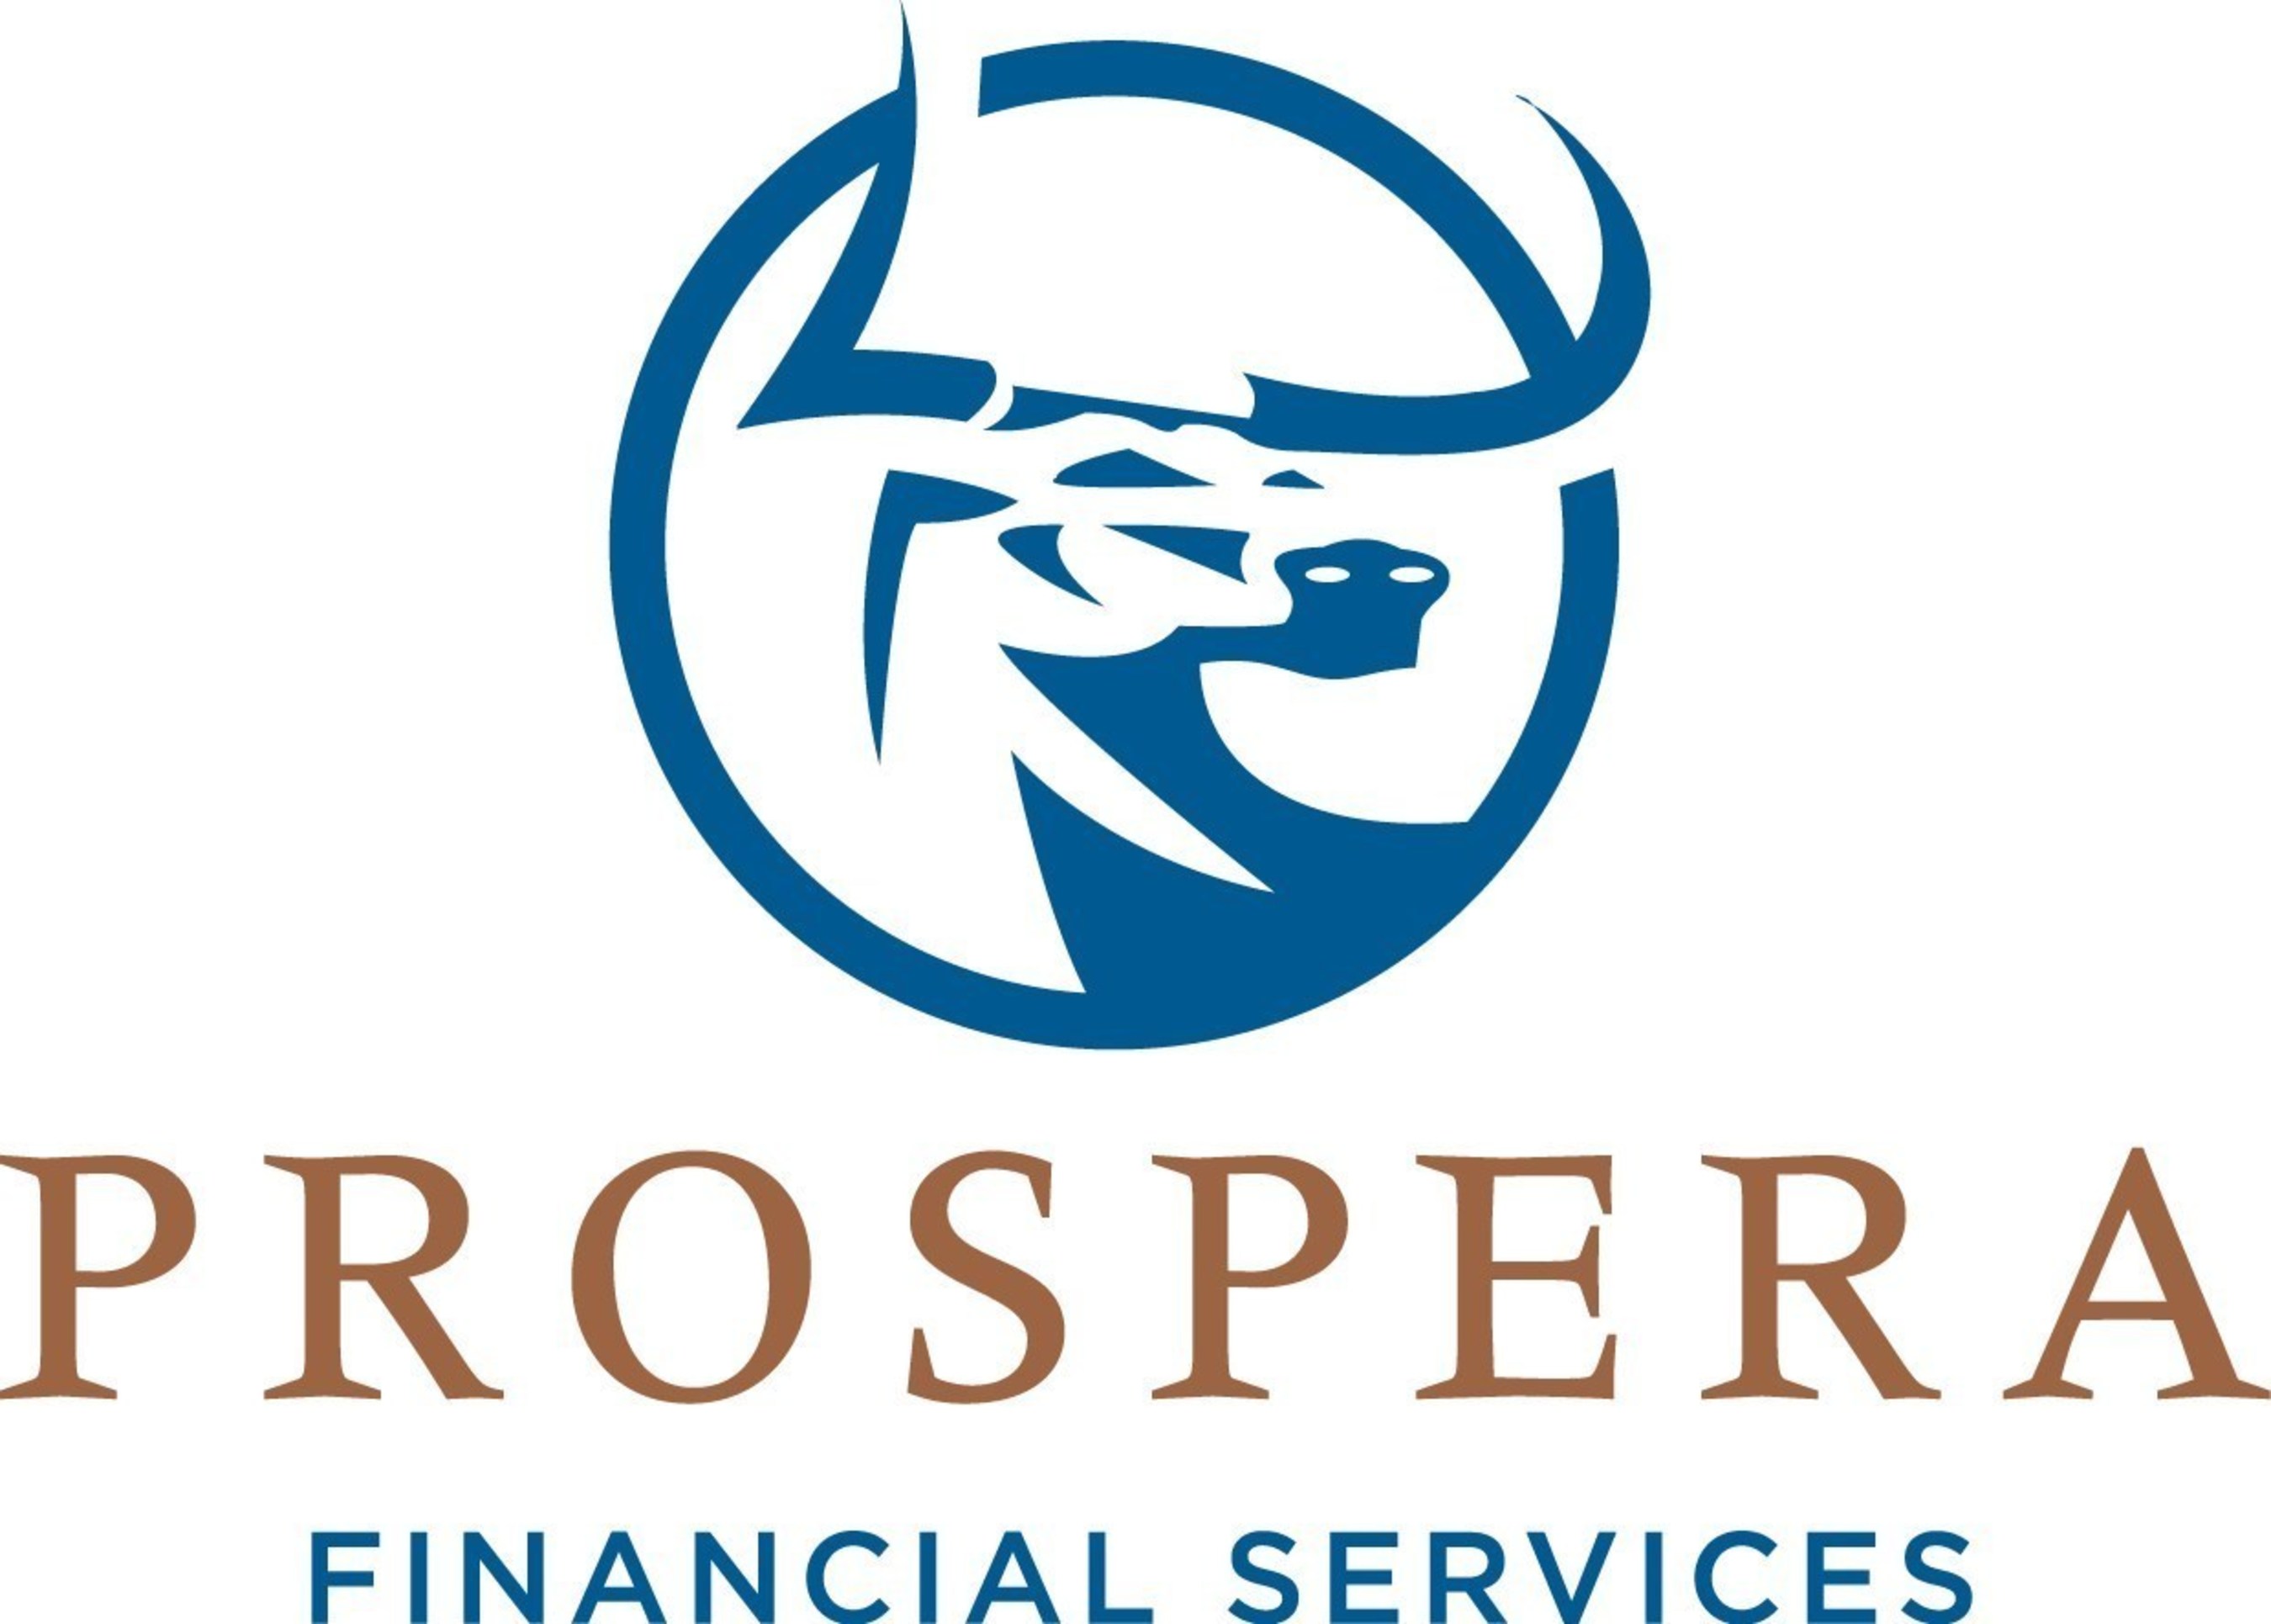 Prospera Financial Services is Proud to Announce the Affiliation of Cordatus Wealth Management, LLC to the Firm, Adding 1.2 Billion in AUM